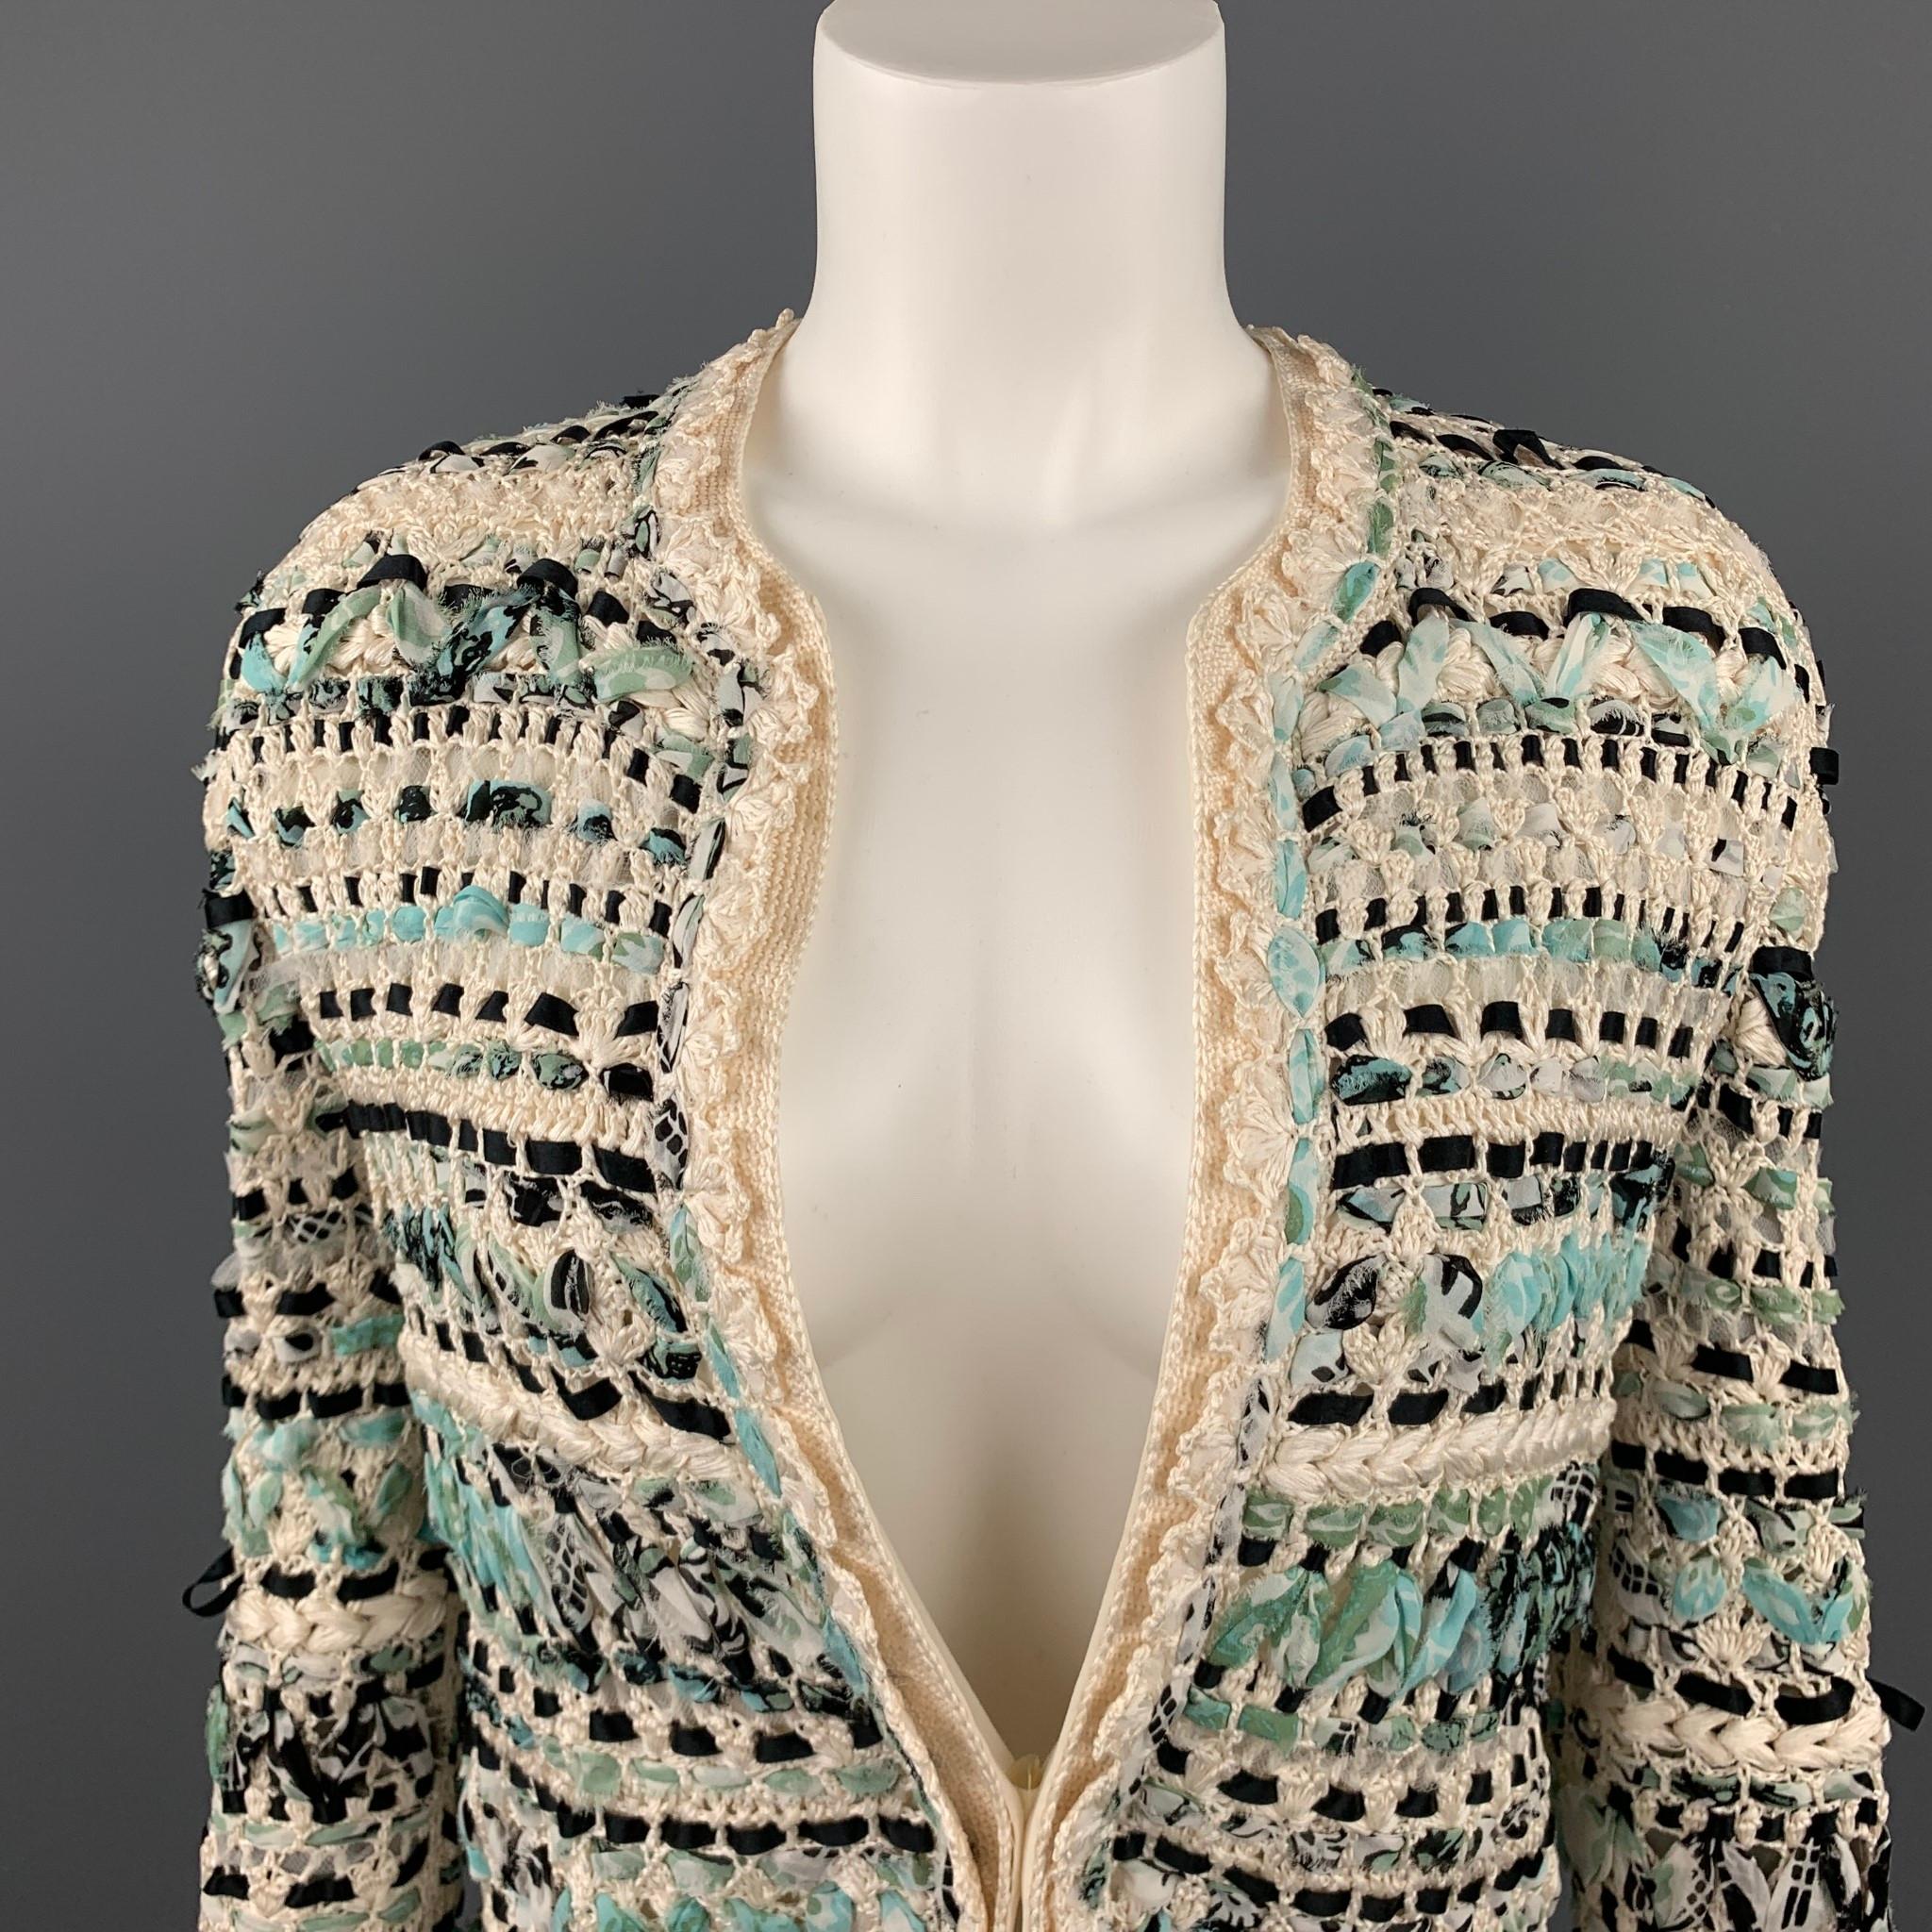 OSCAR DE LA RENTA open front cardigan jacket comes in a light creamy beige silk crochet knit with teal blue and black chiffon and ribbon woven throughout with a round collar, patch pockets, and cream chiffon half liner.

Good Pre-Owned